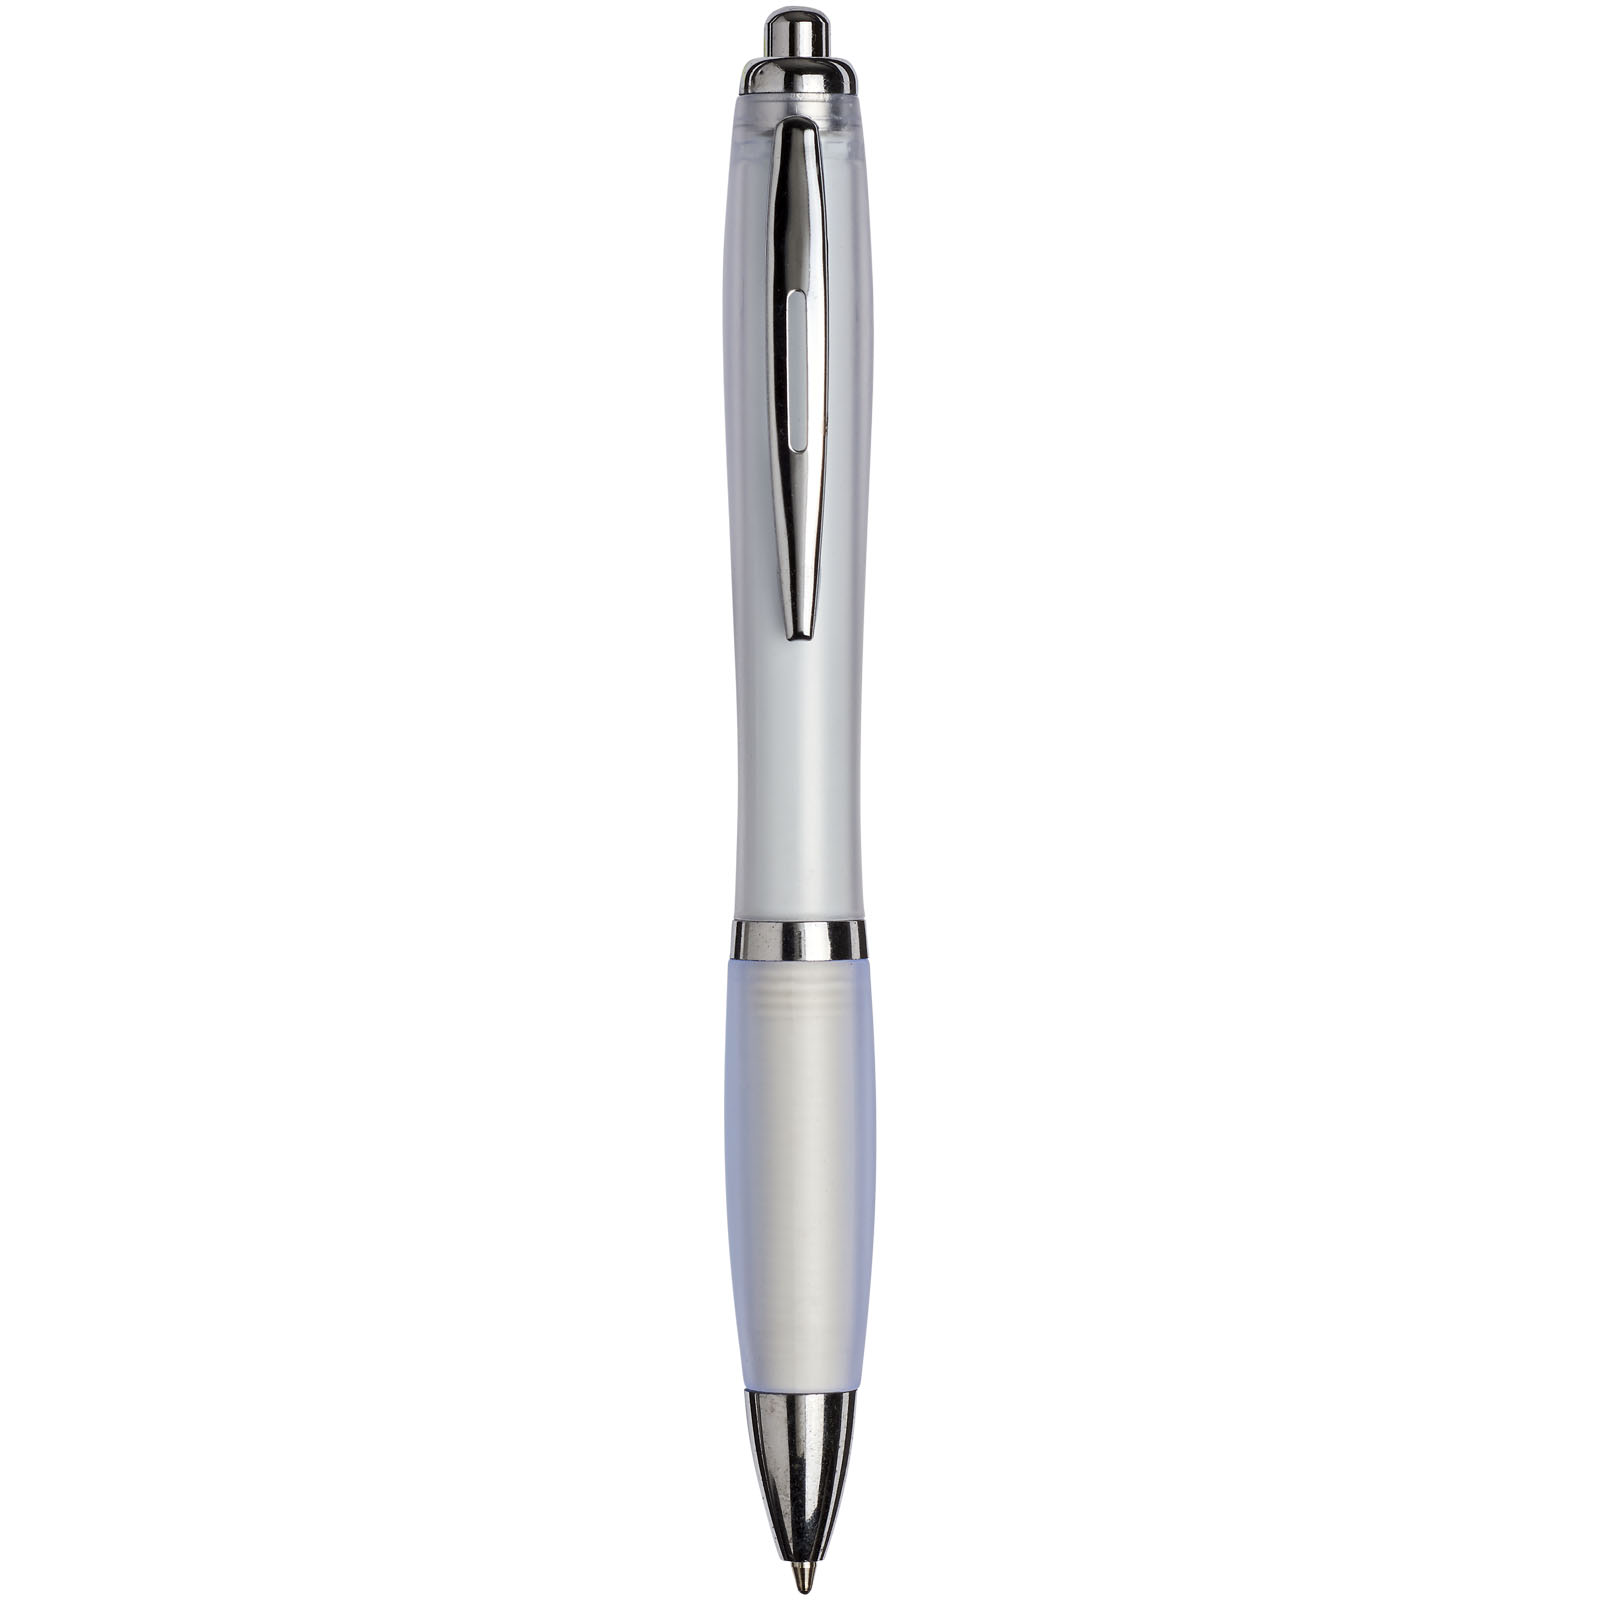 Stylos-bille publicitaires - Curvy ballpoint pen with frosted barrel and grip